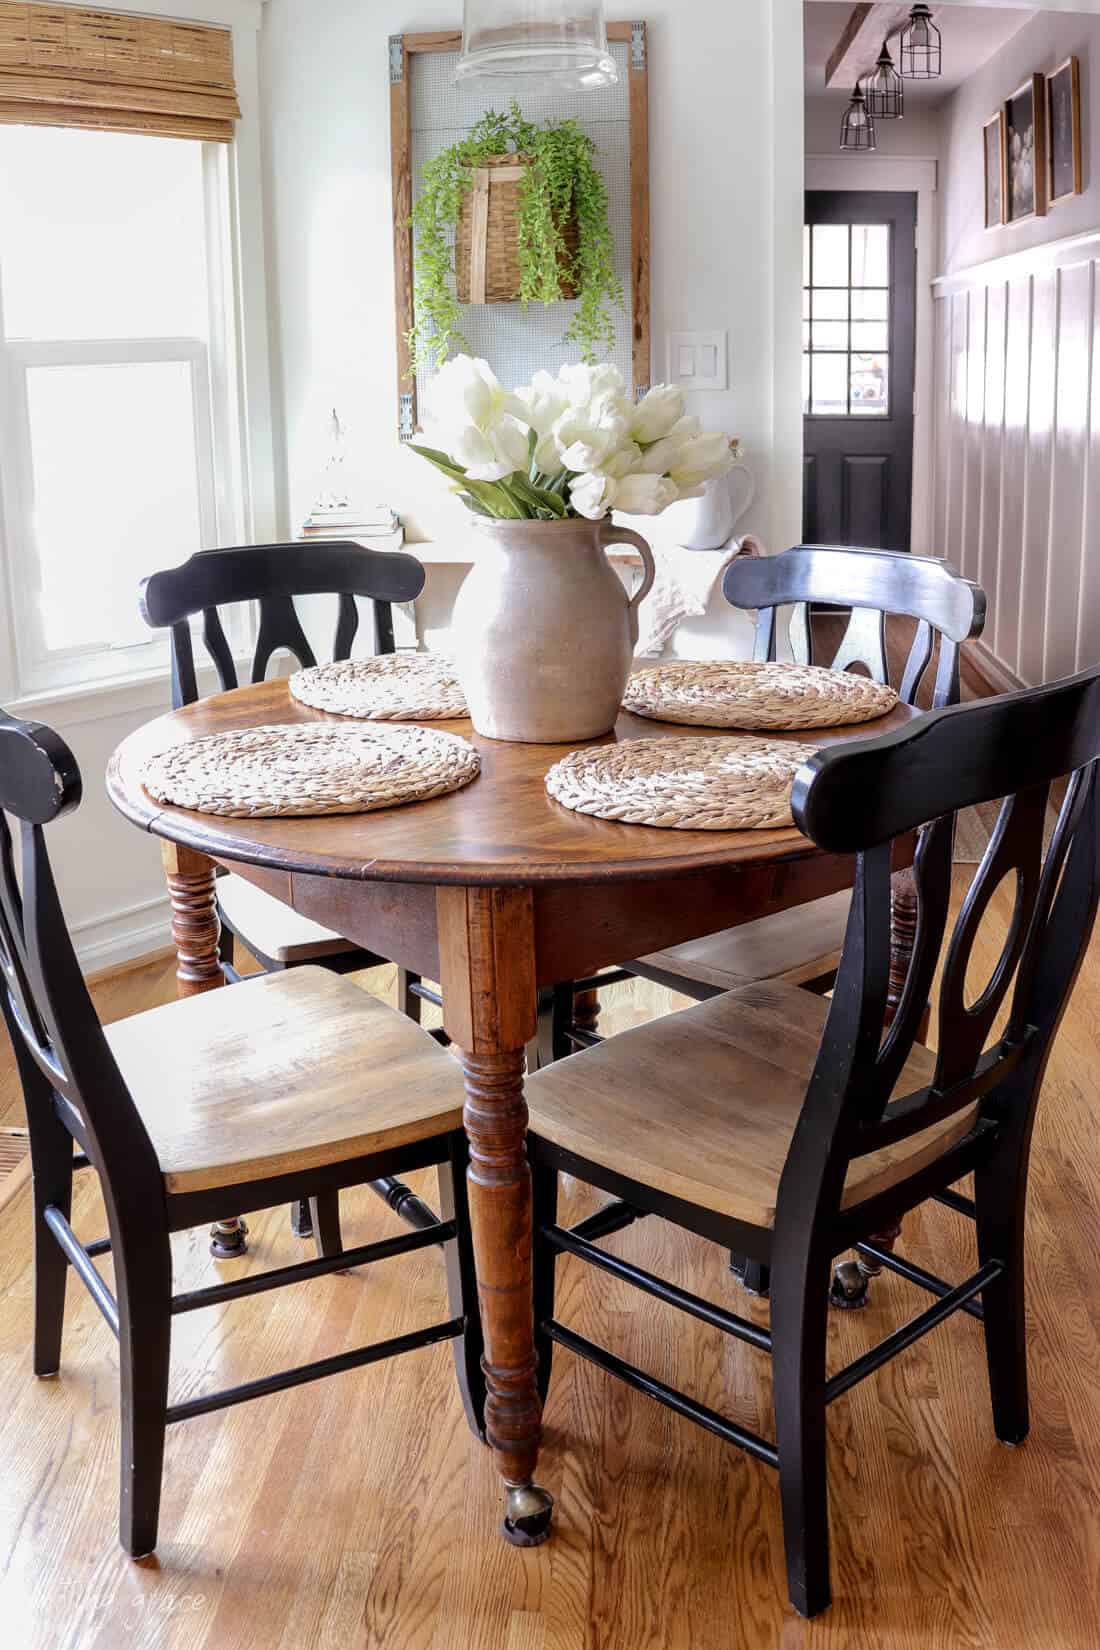 eat in kitchen with woven shades and clear hanging pendant light and a round table with black chairs. A vintage pottery vase is sitting on the table filled with tulips and rattan placemats